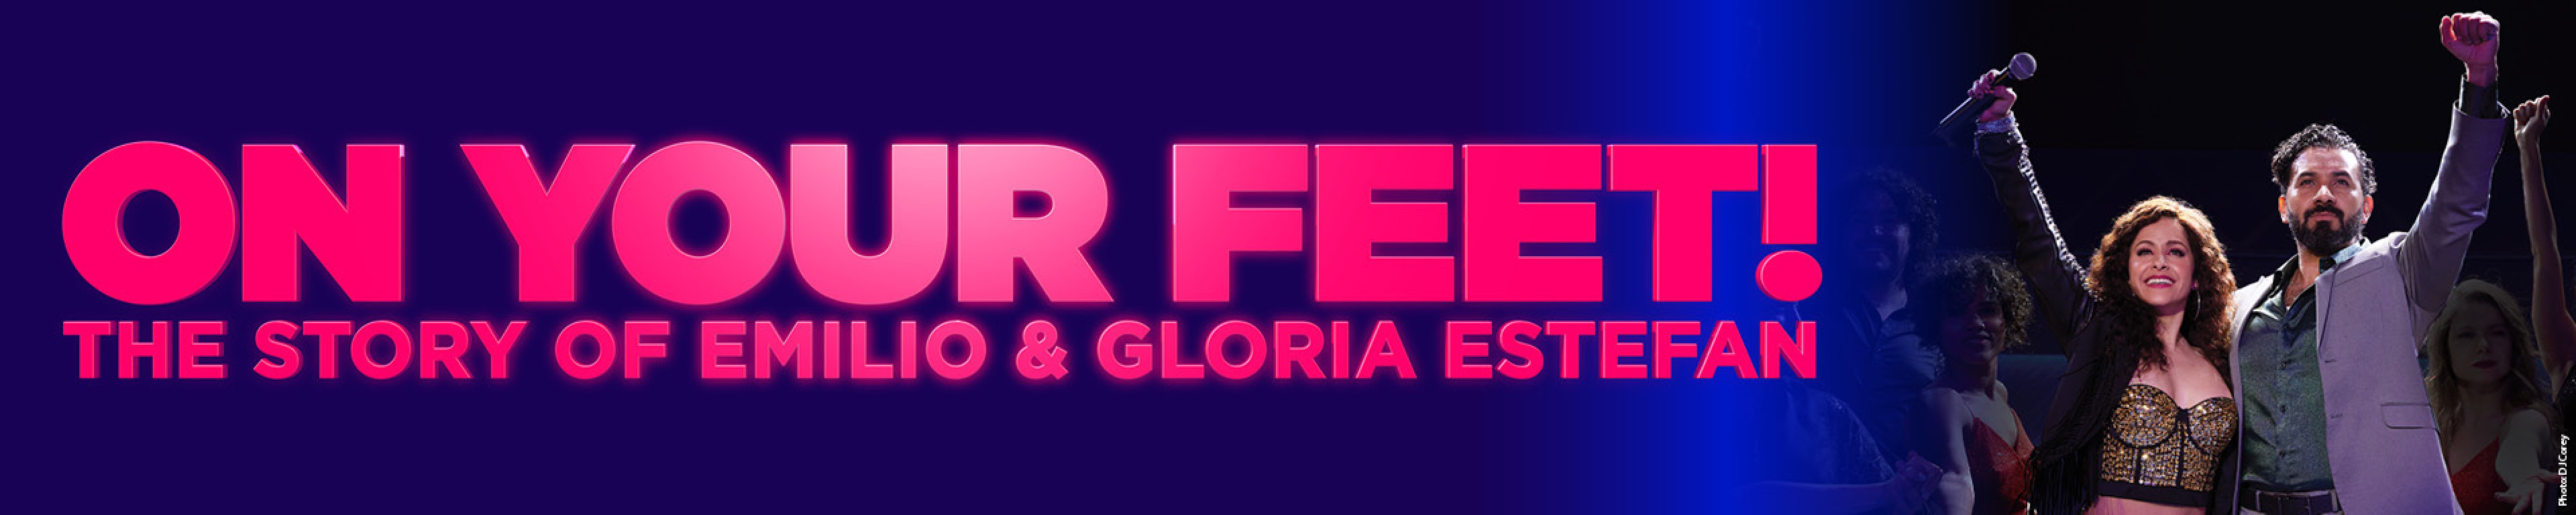 On Your Feet and image of Emilio and Gloria Estefan